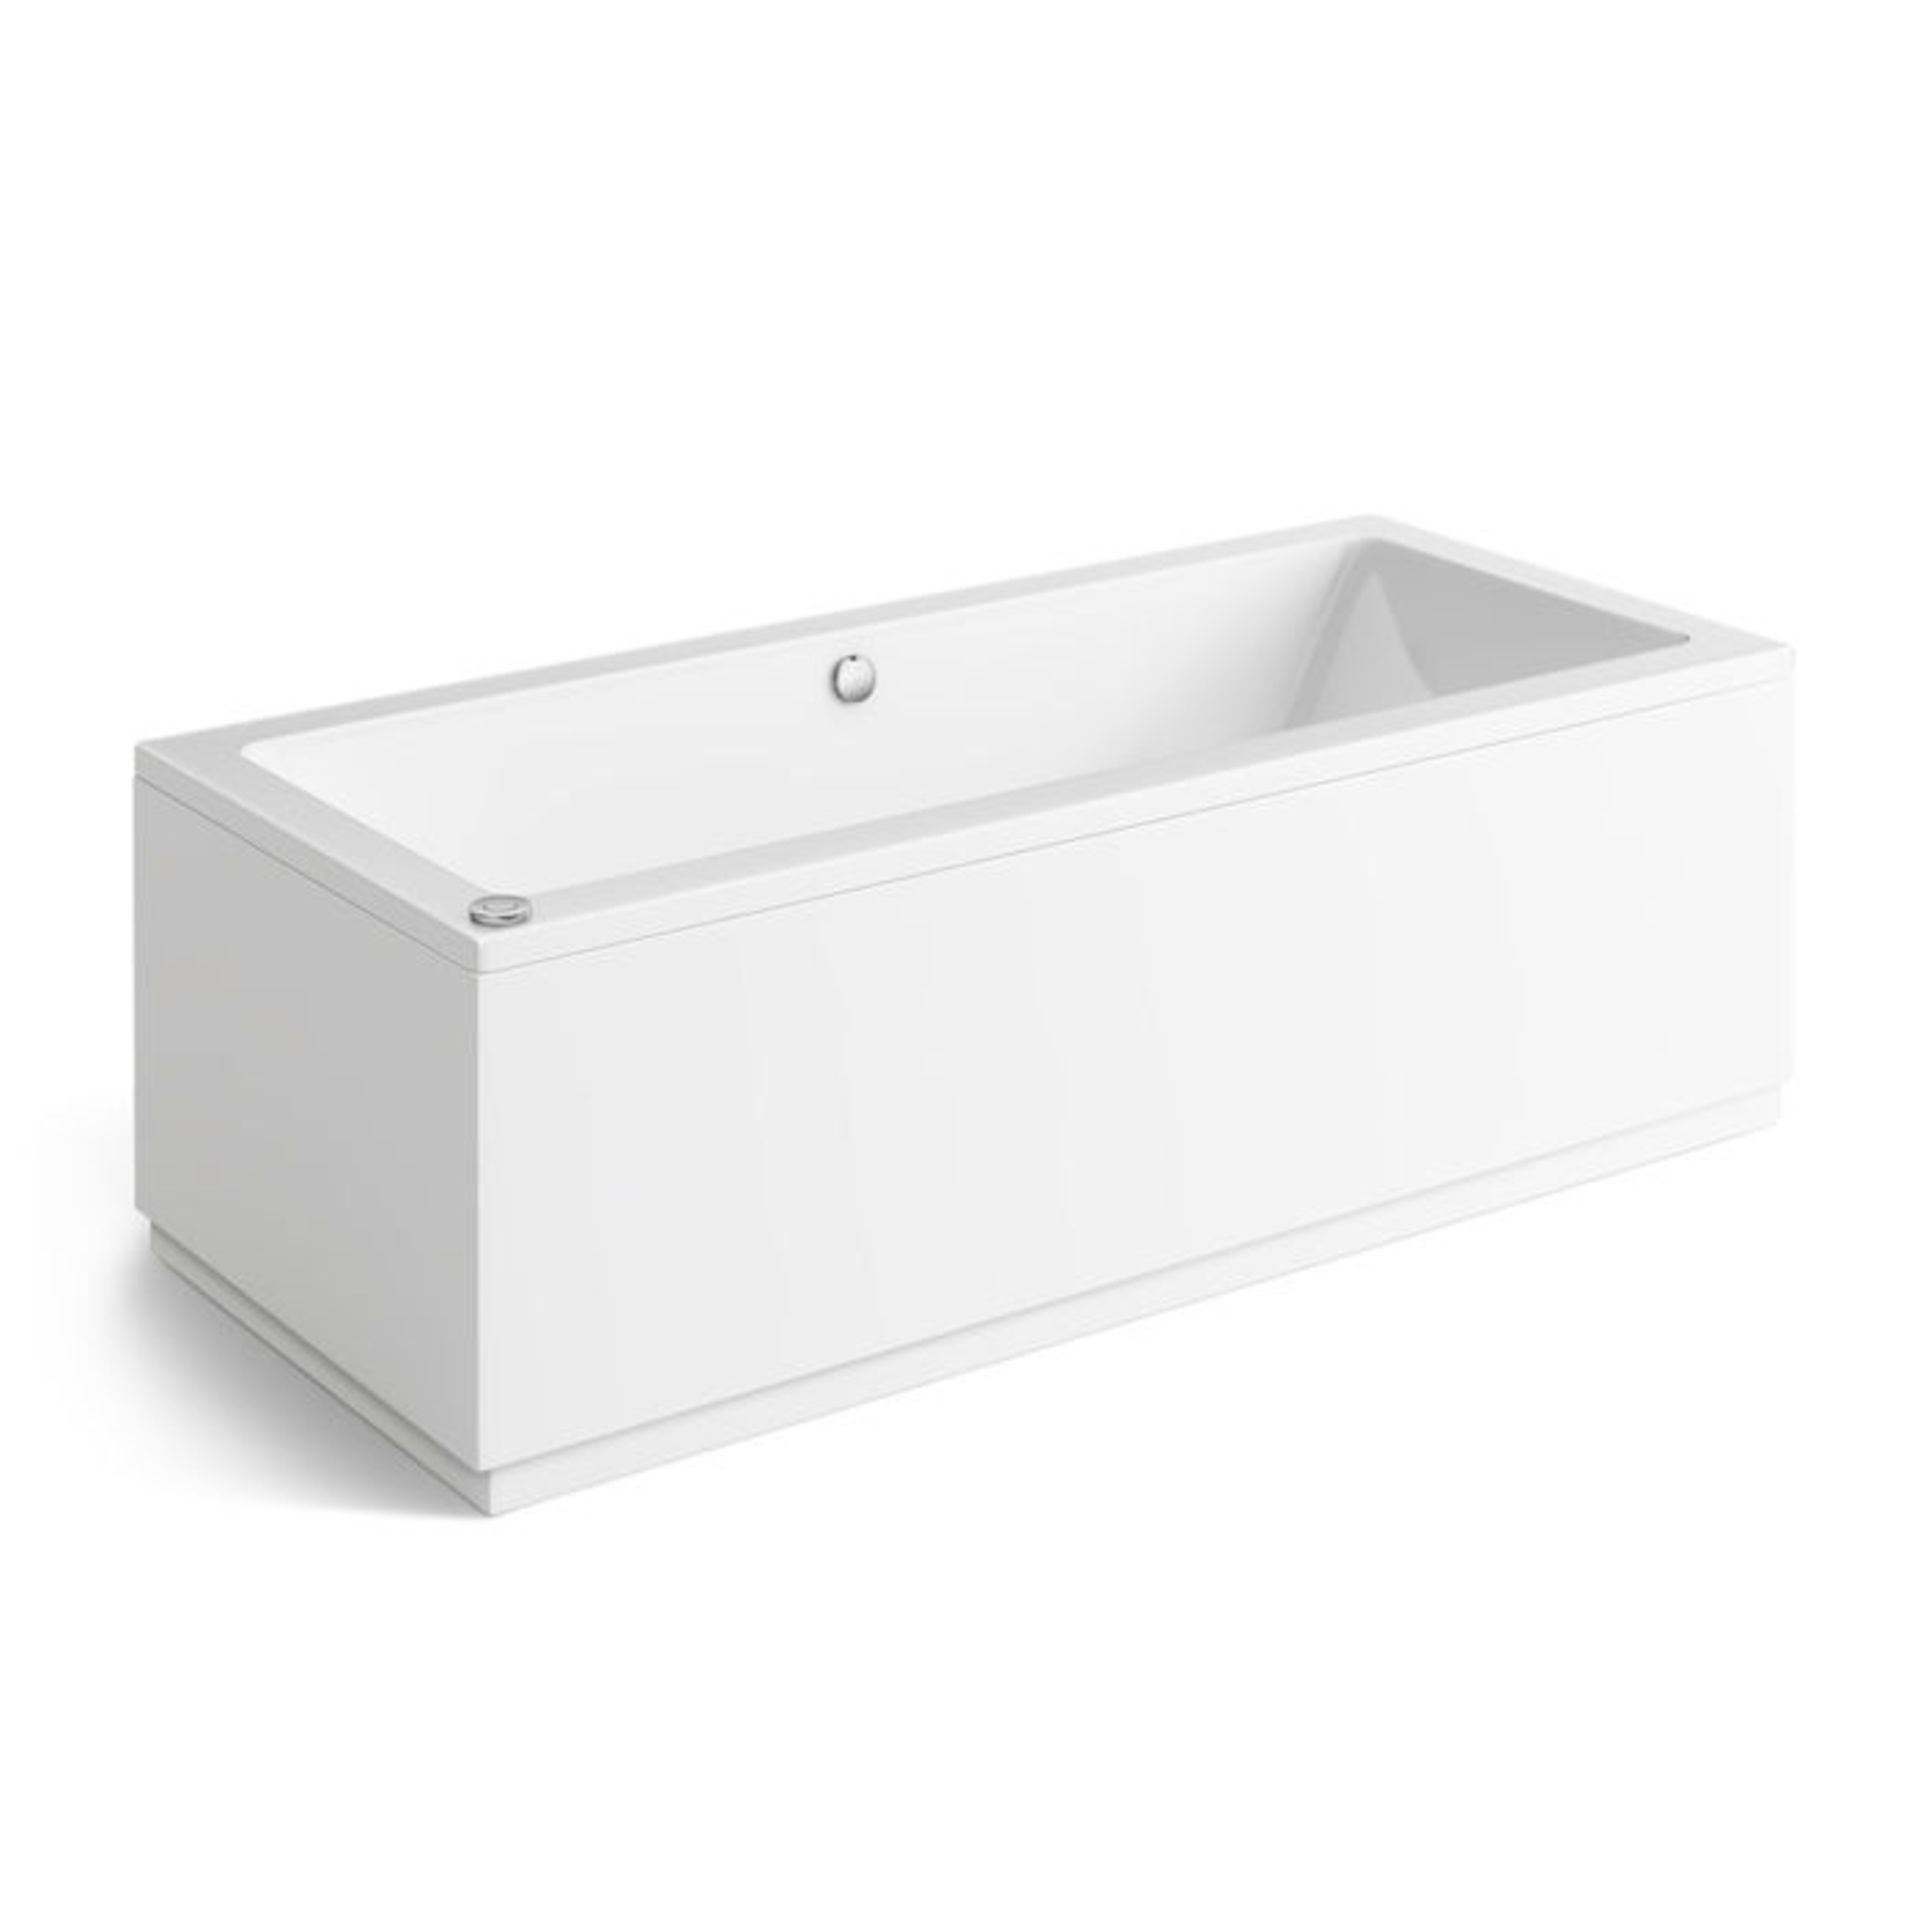 (ZL2) Whirlpool Double Ended Bath 1700 x 750mm (14Jets). We love this because it feels as though you - Image 4 of 5